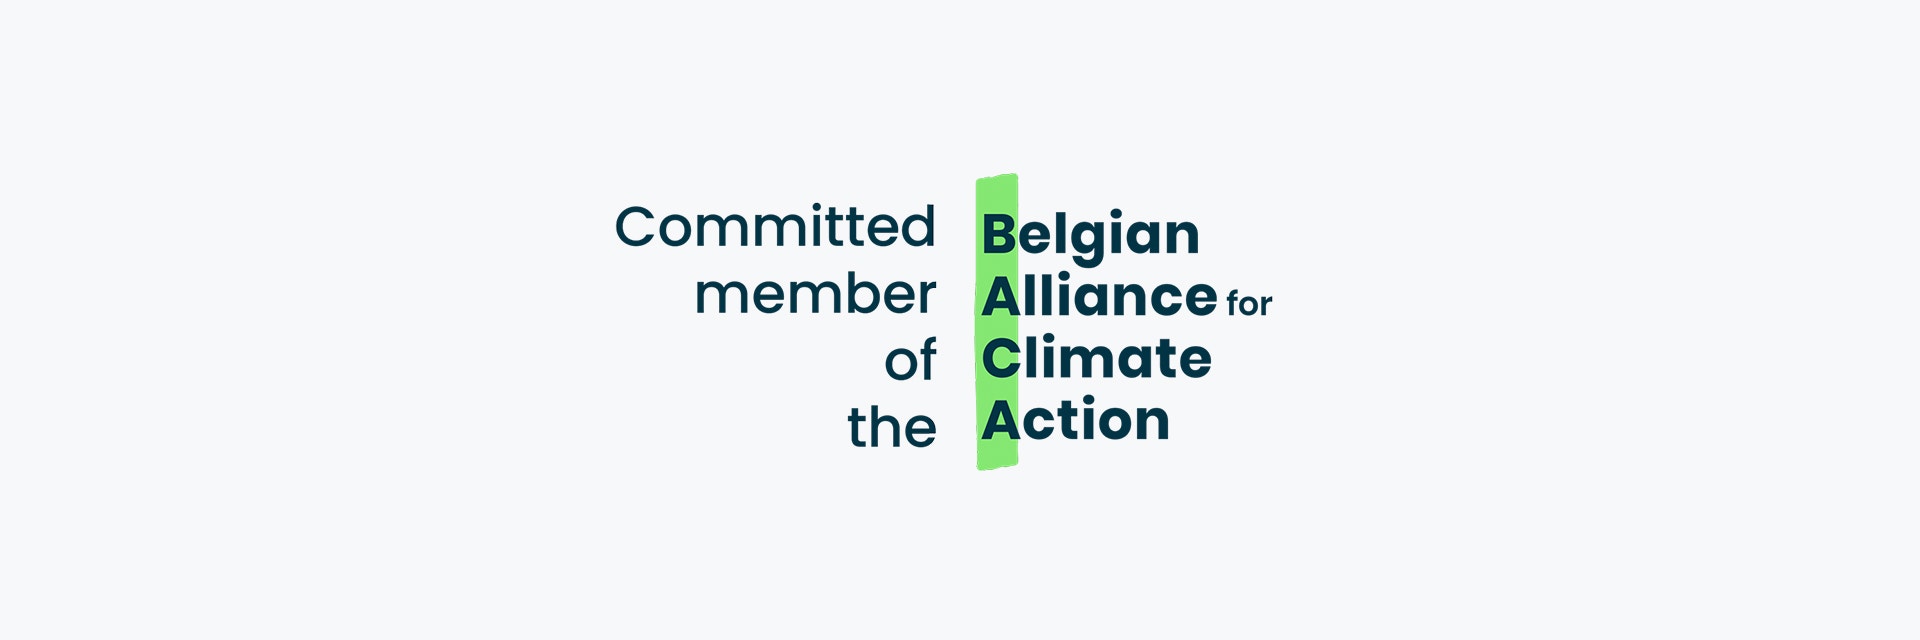 Comitted member of the Belgian Alliance for Climate Action logo